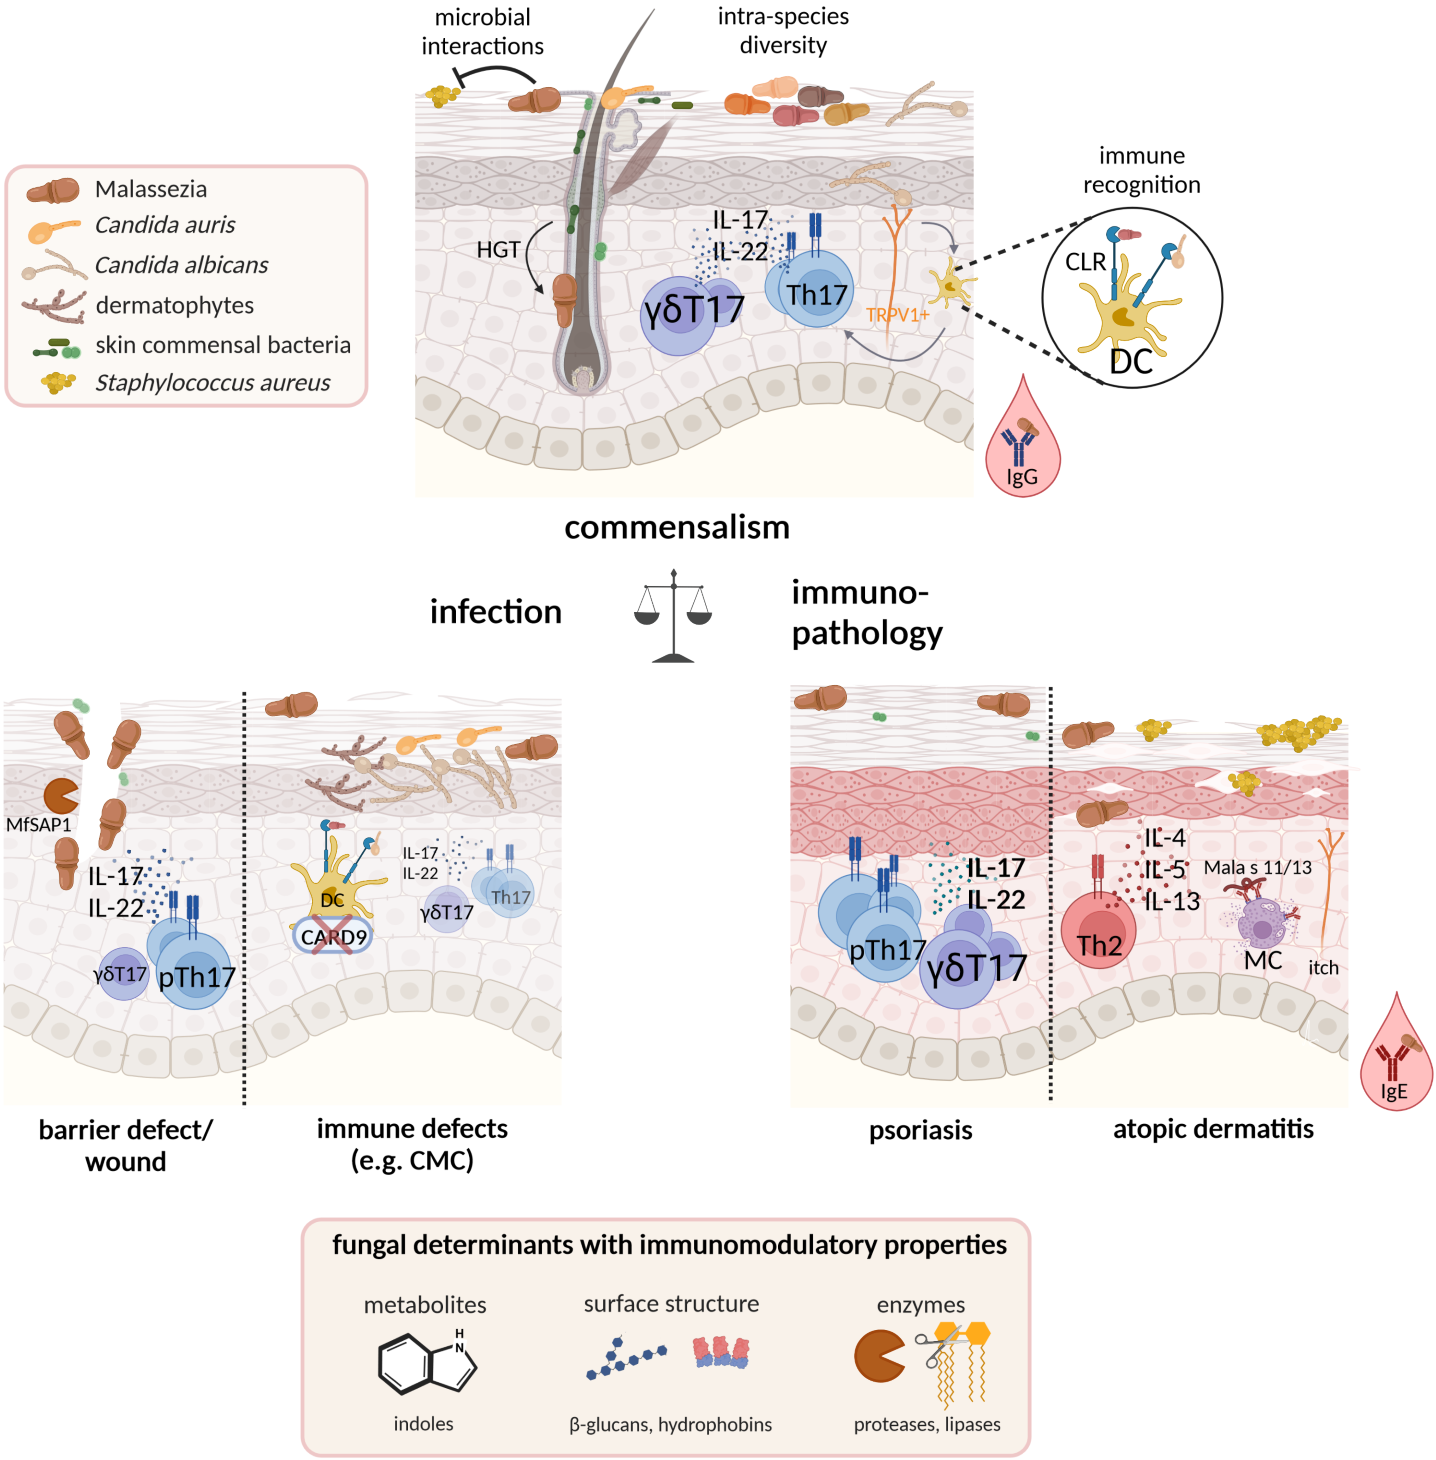 Commensalism: Homeostatic immune mechanisms involving IL-17 and IL-22 cytokines keep in check fungal skin commensals. Infection: Skin barrier defects and impaired immune defenses predispose to skin fungal infections. Immunopathology: Dysregulated antifungal immunity is associated with the pathogenesis of chronic inflammatory skin disorders such as psoriasis and atopic dermatitis. Our lab studies the impact of fungal determinants in the balance between these three processes.